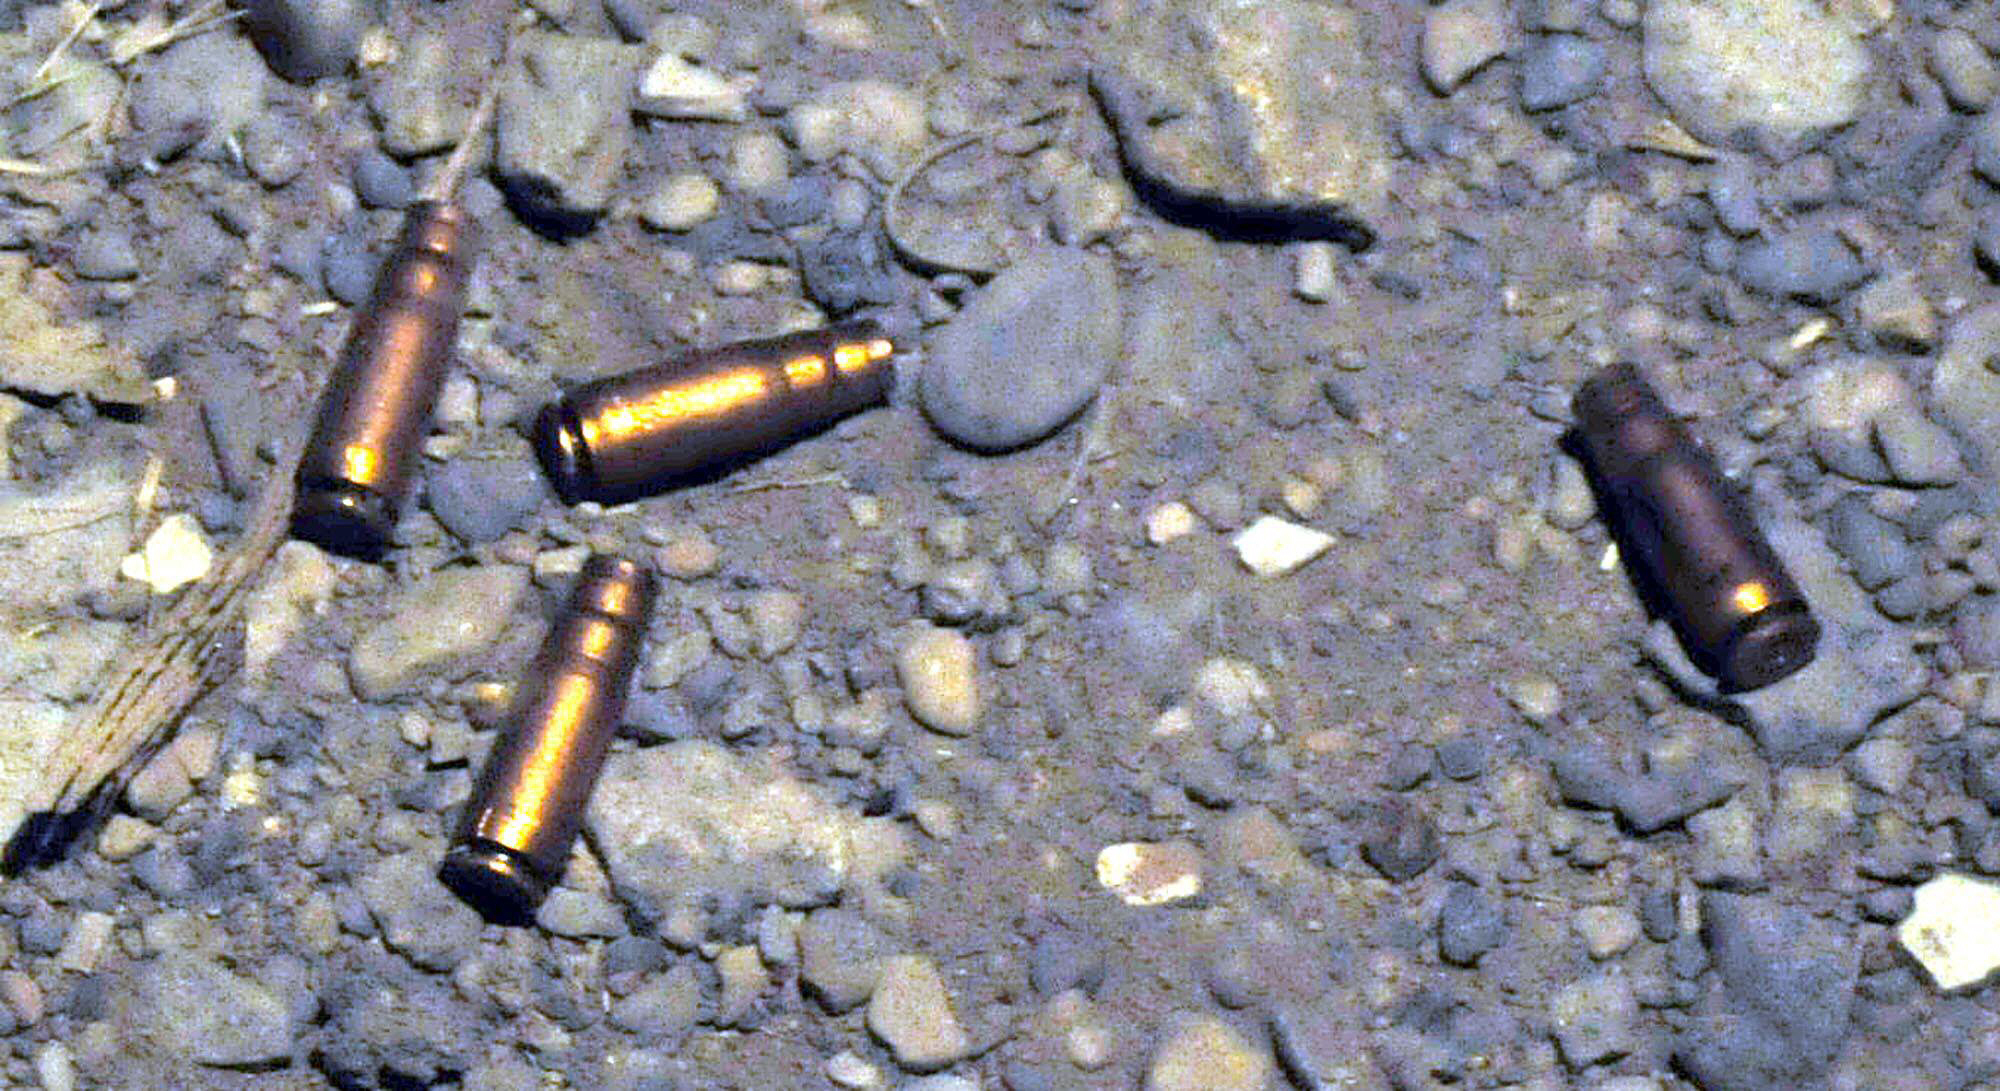 two robbers killed in police encounters